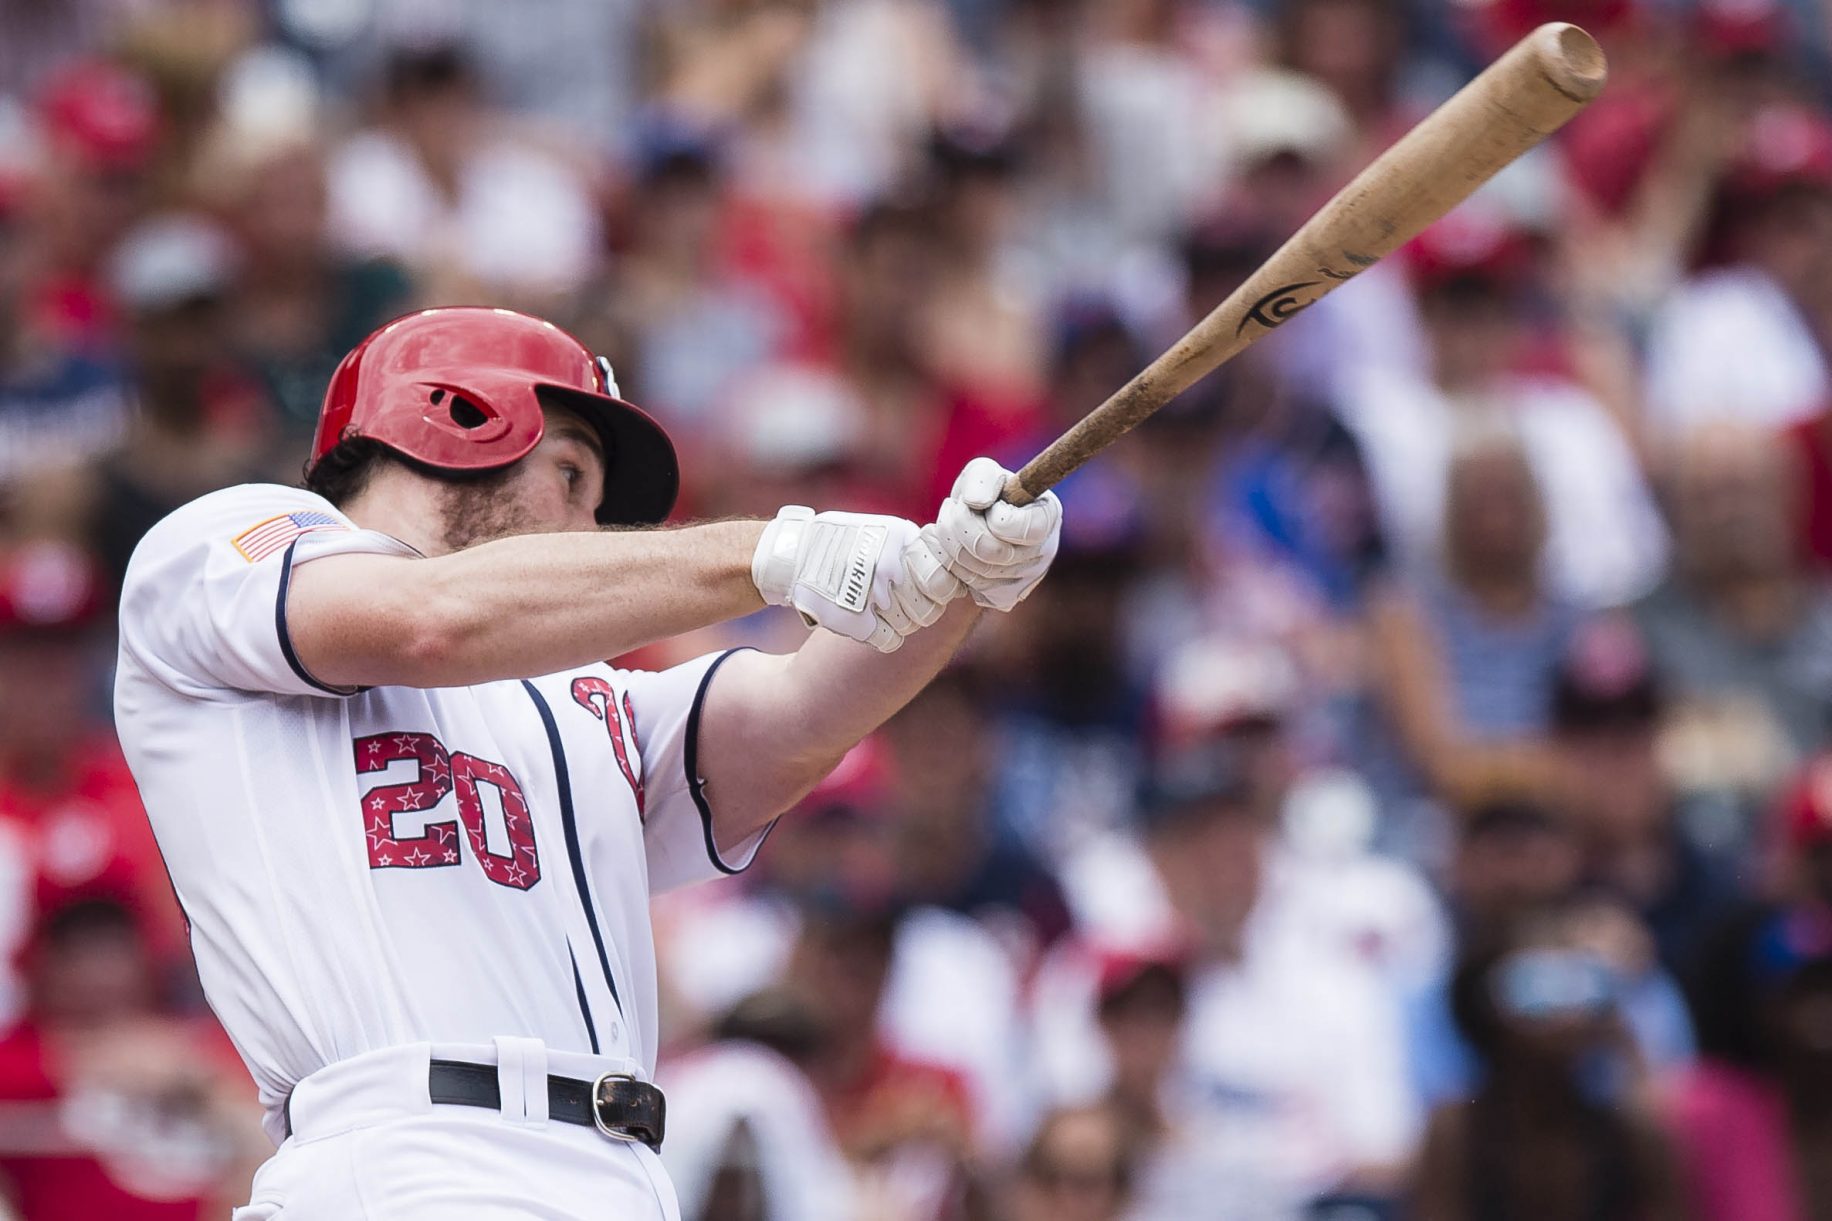 Daniel Murphy, Nats Destroy New York Mets on Independence Day (Highlights) 2